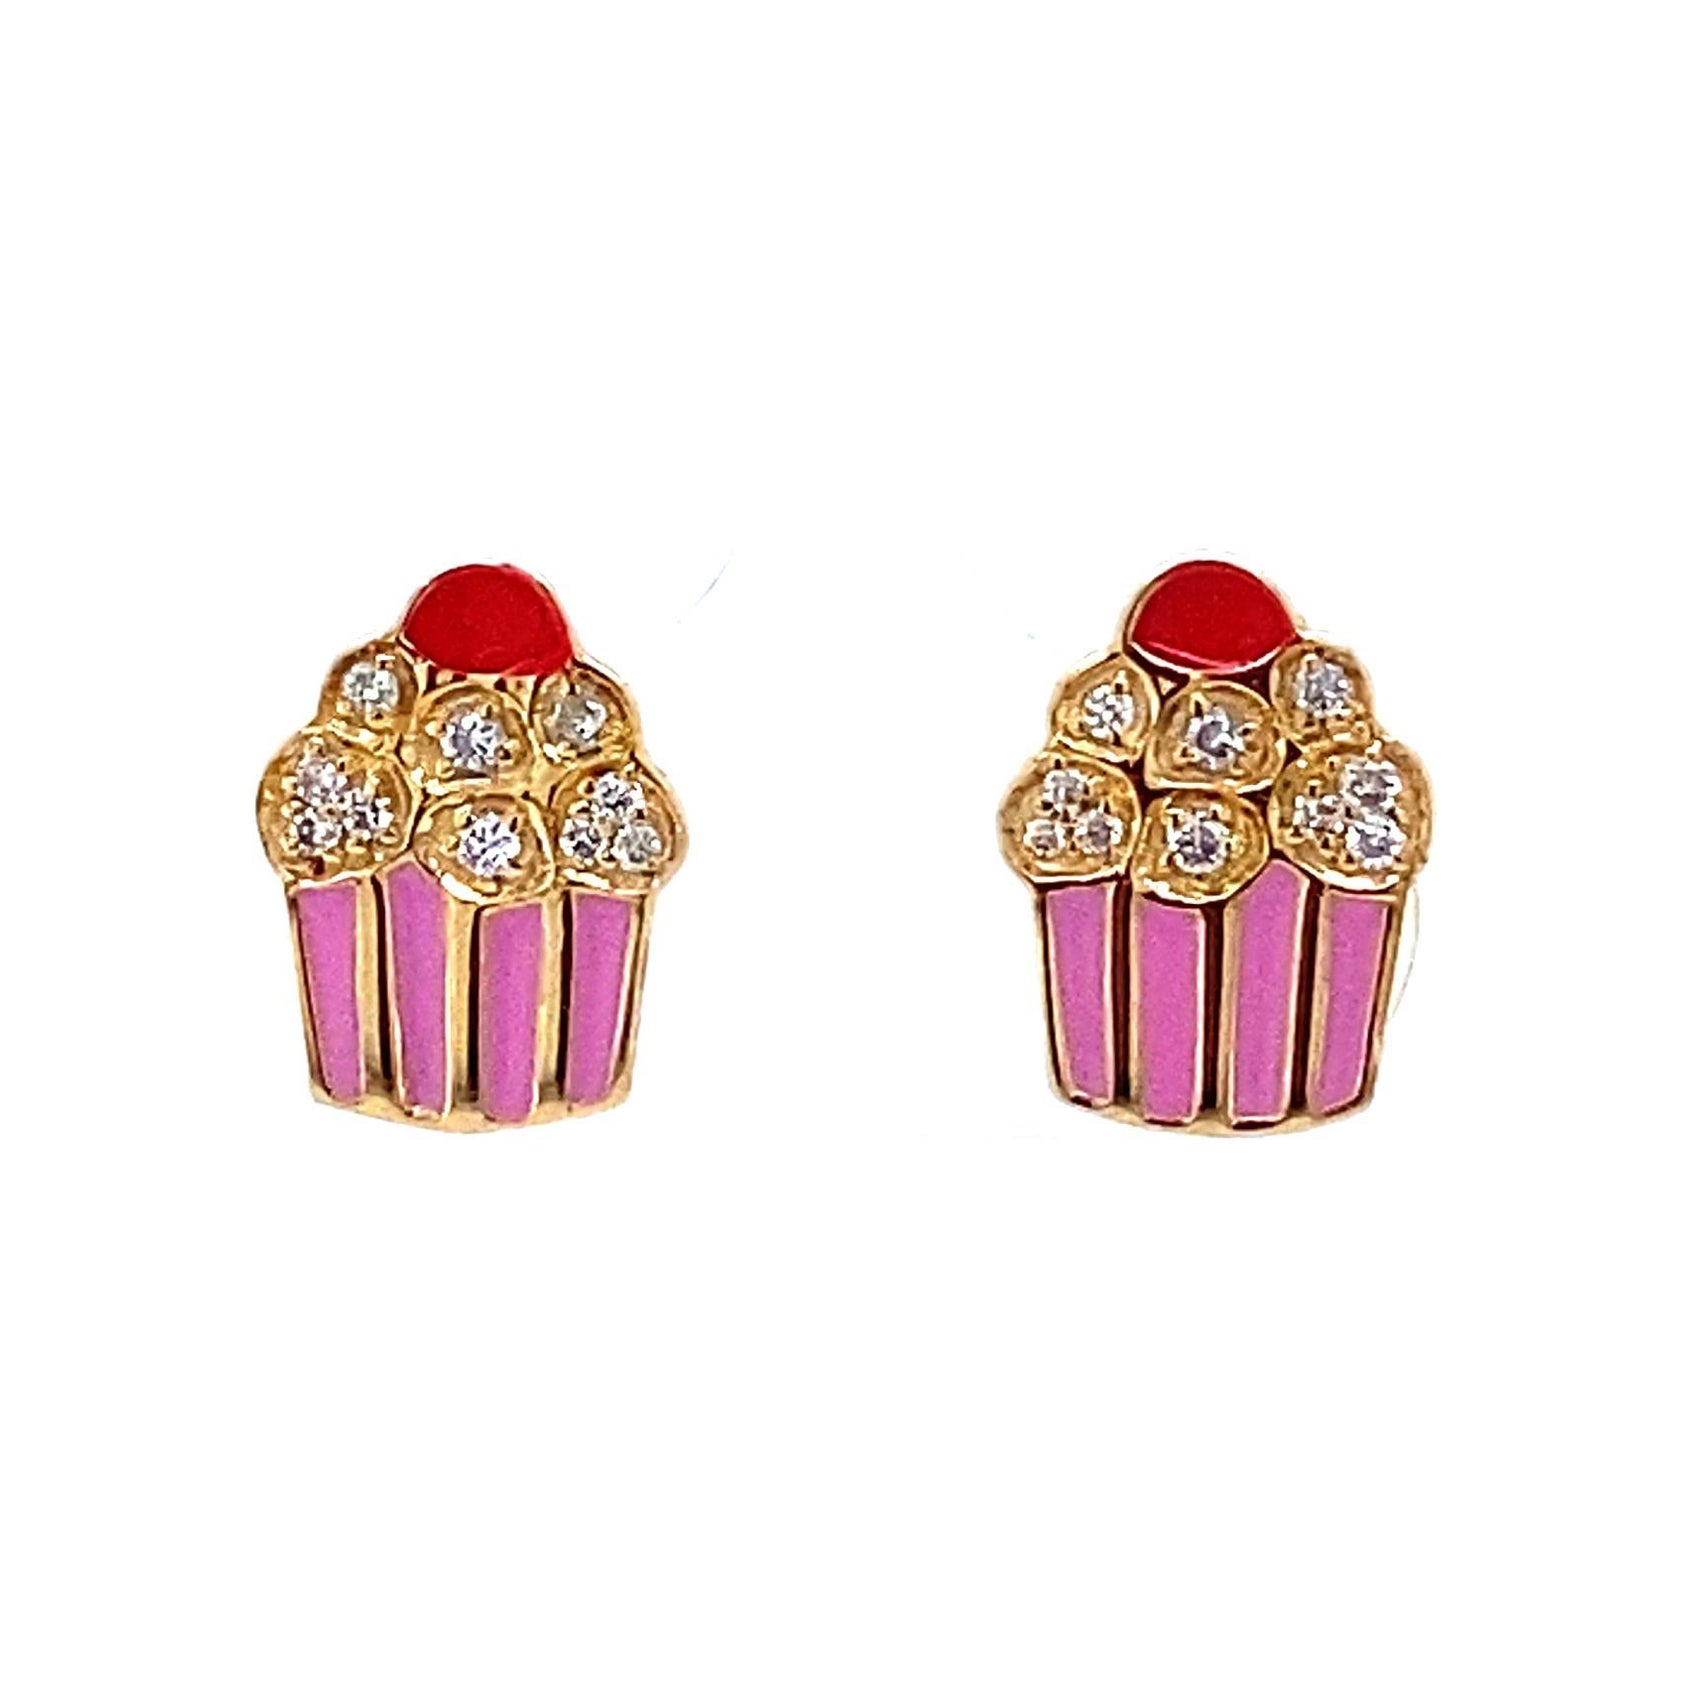 Cute Enameled Cupcake Diamond Earrings for Girls/Kids/Toddlers in 18K Solid Gold For Sale